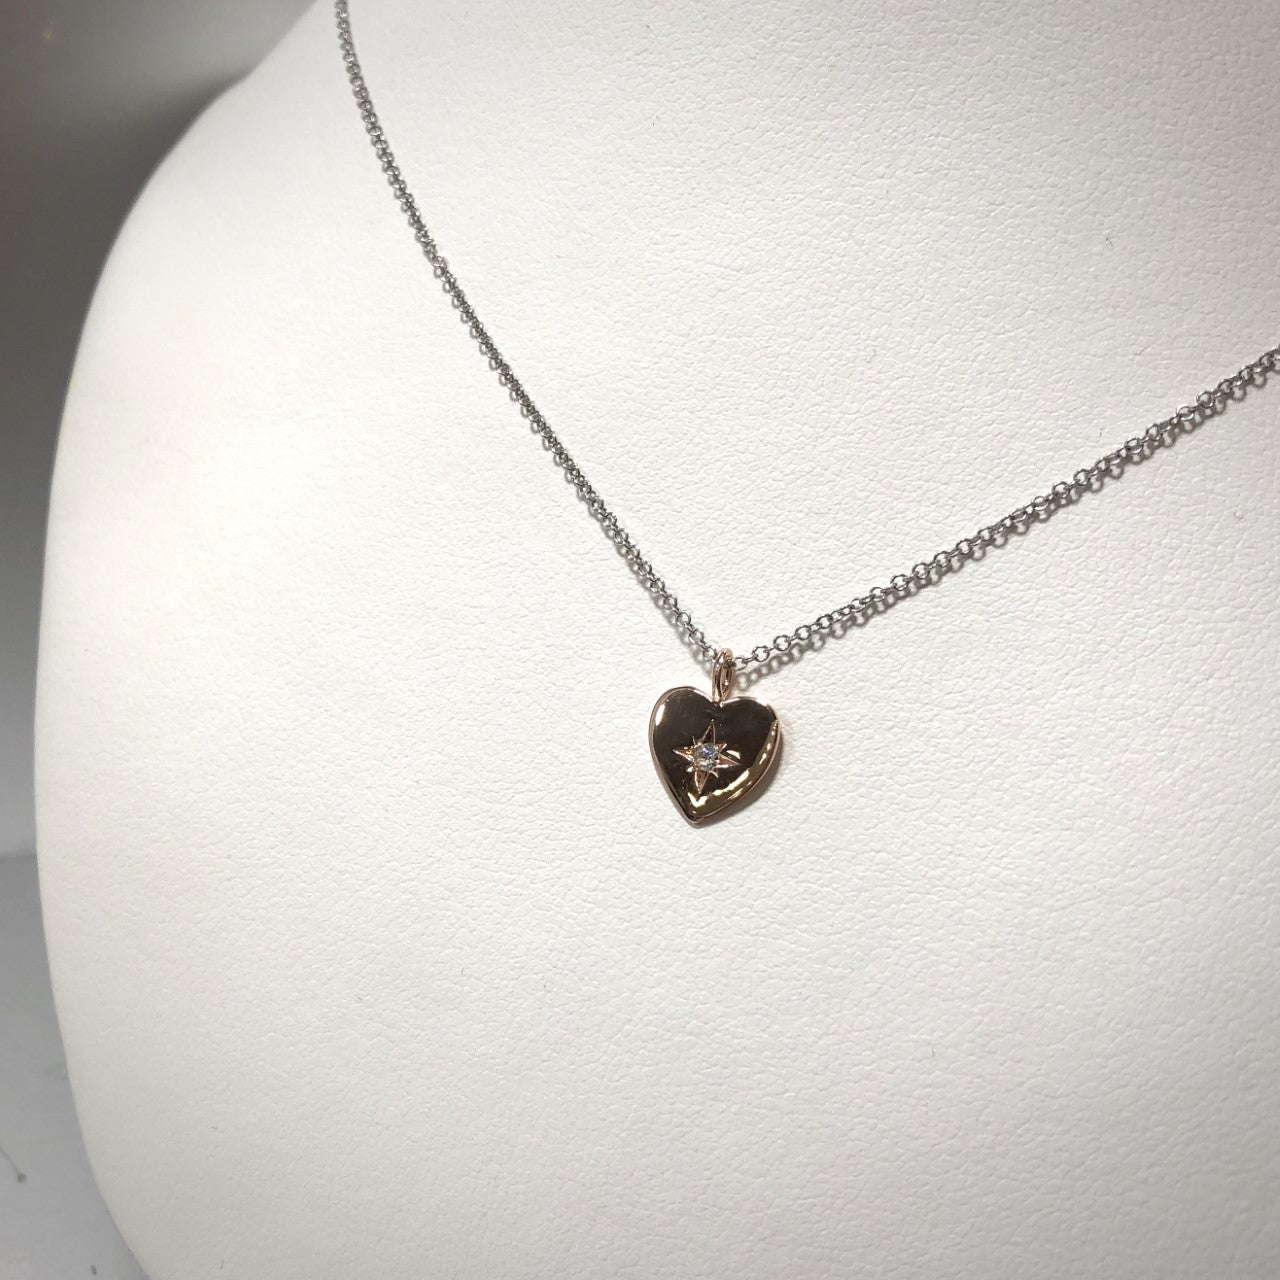 10K Rose and White Gold Diamond Heart Necklace